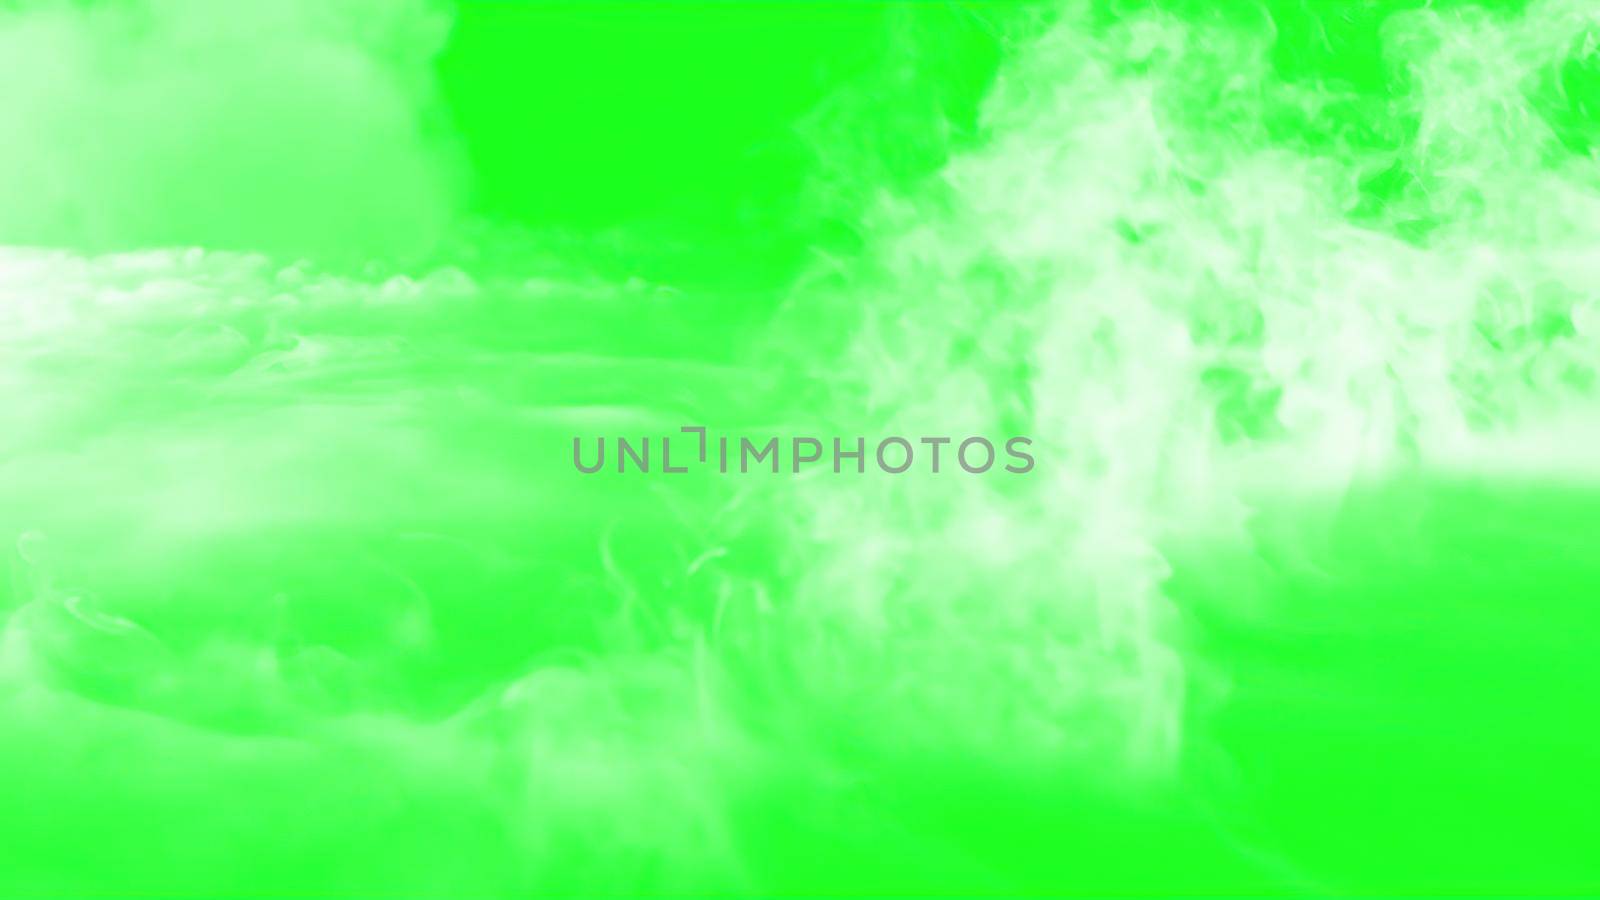 3d illustration - Clouds On The Green Screen Background